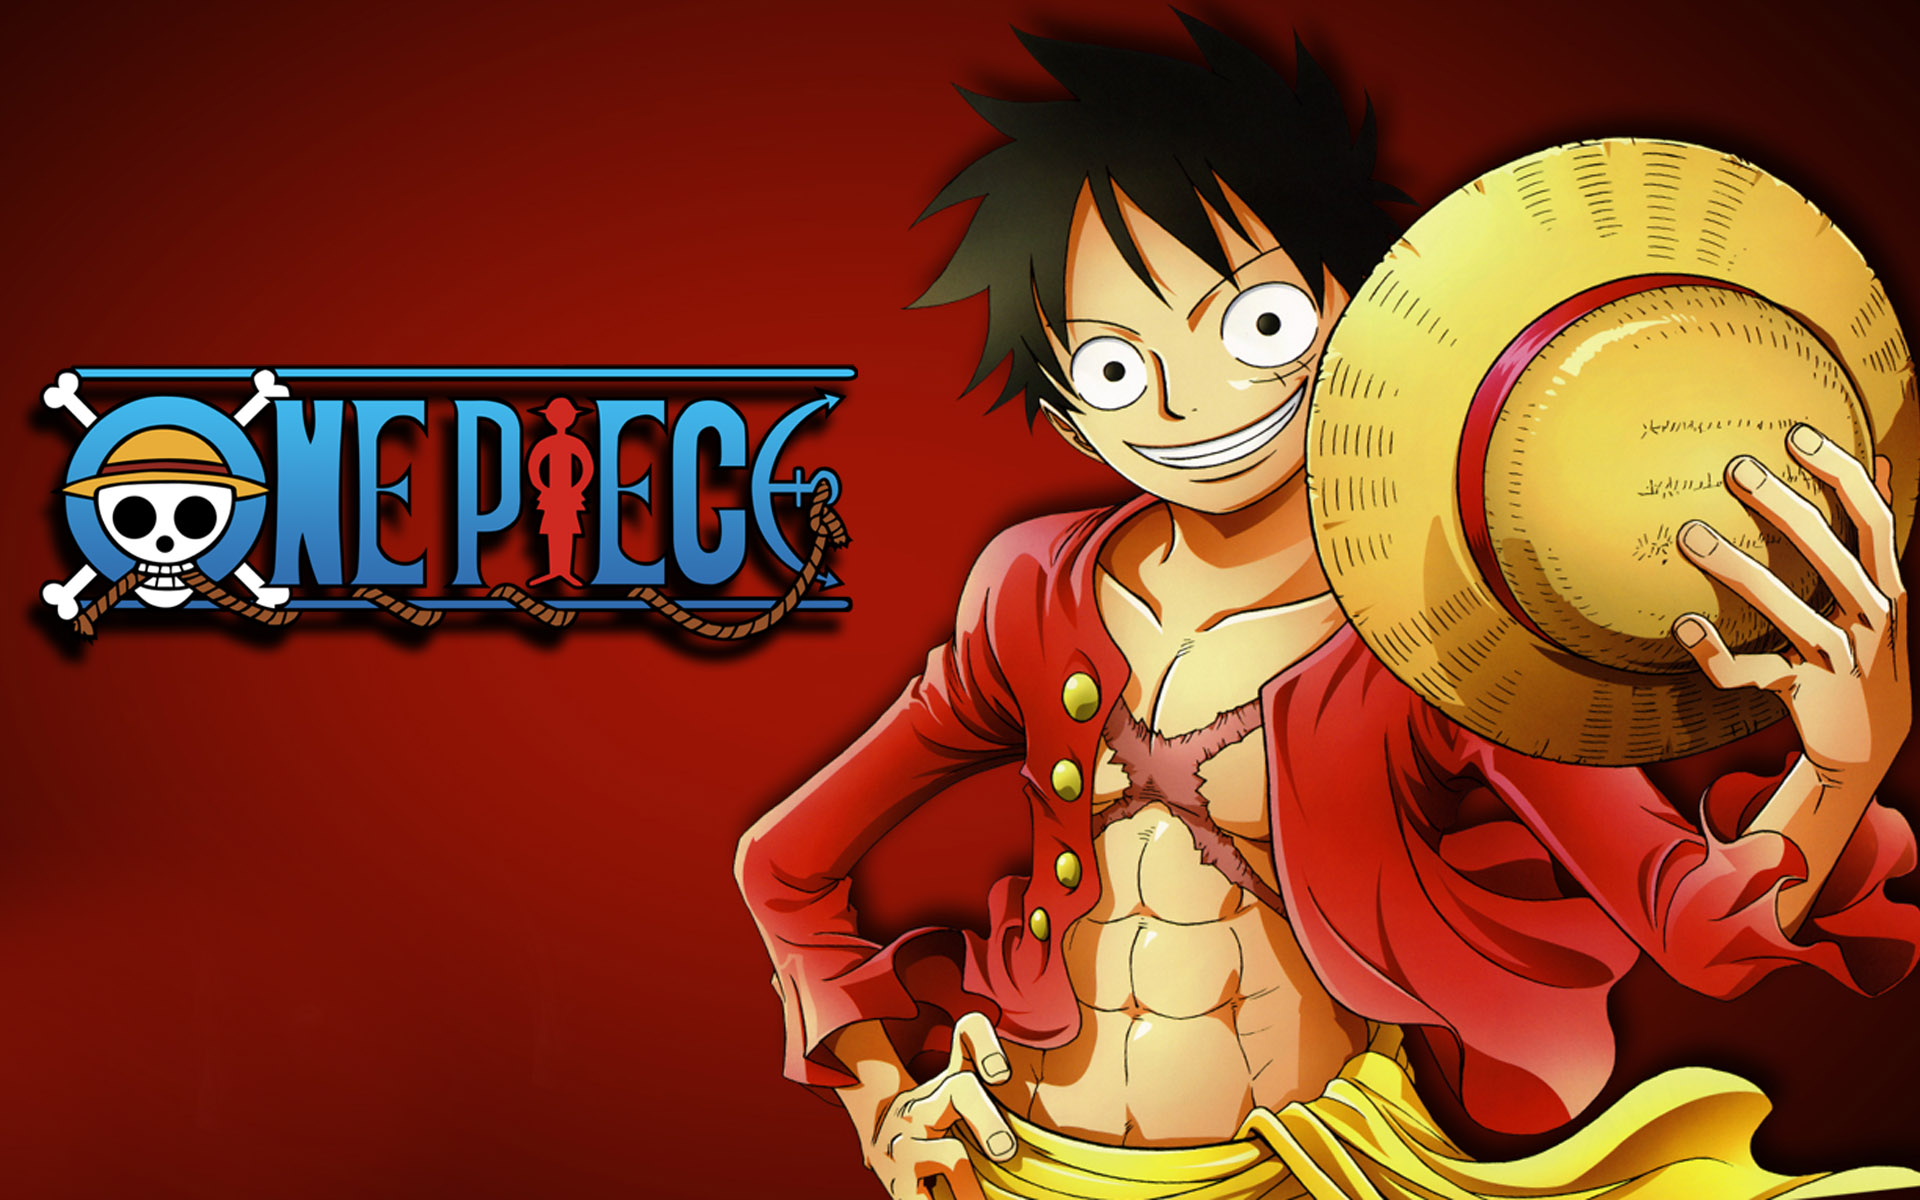 1300+ Monkey D. Luffy HD Wallpapers and Backgrounds